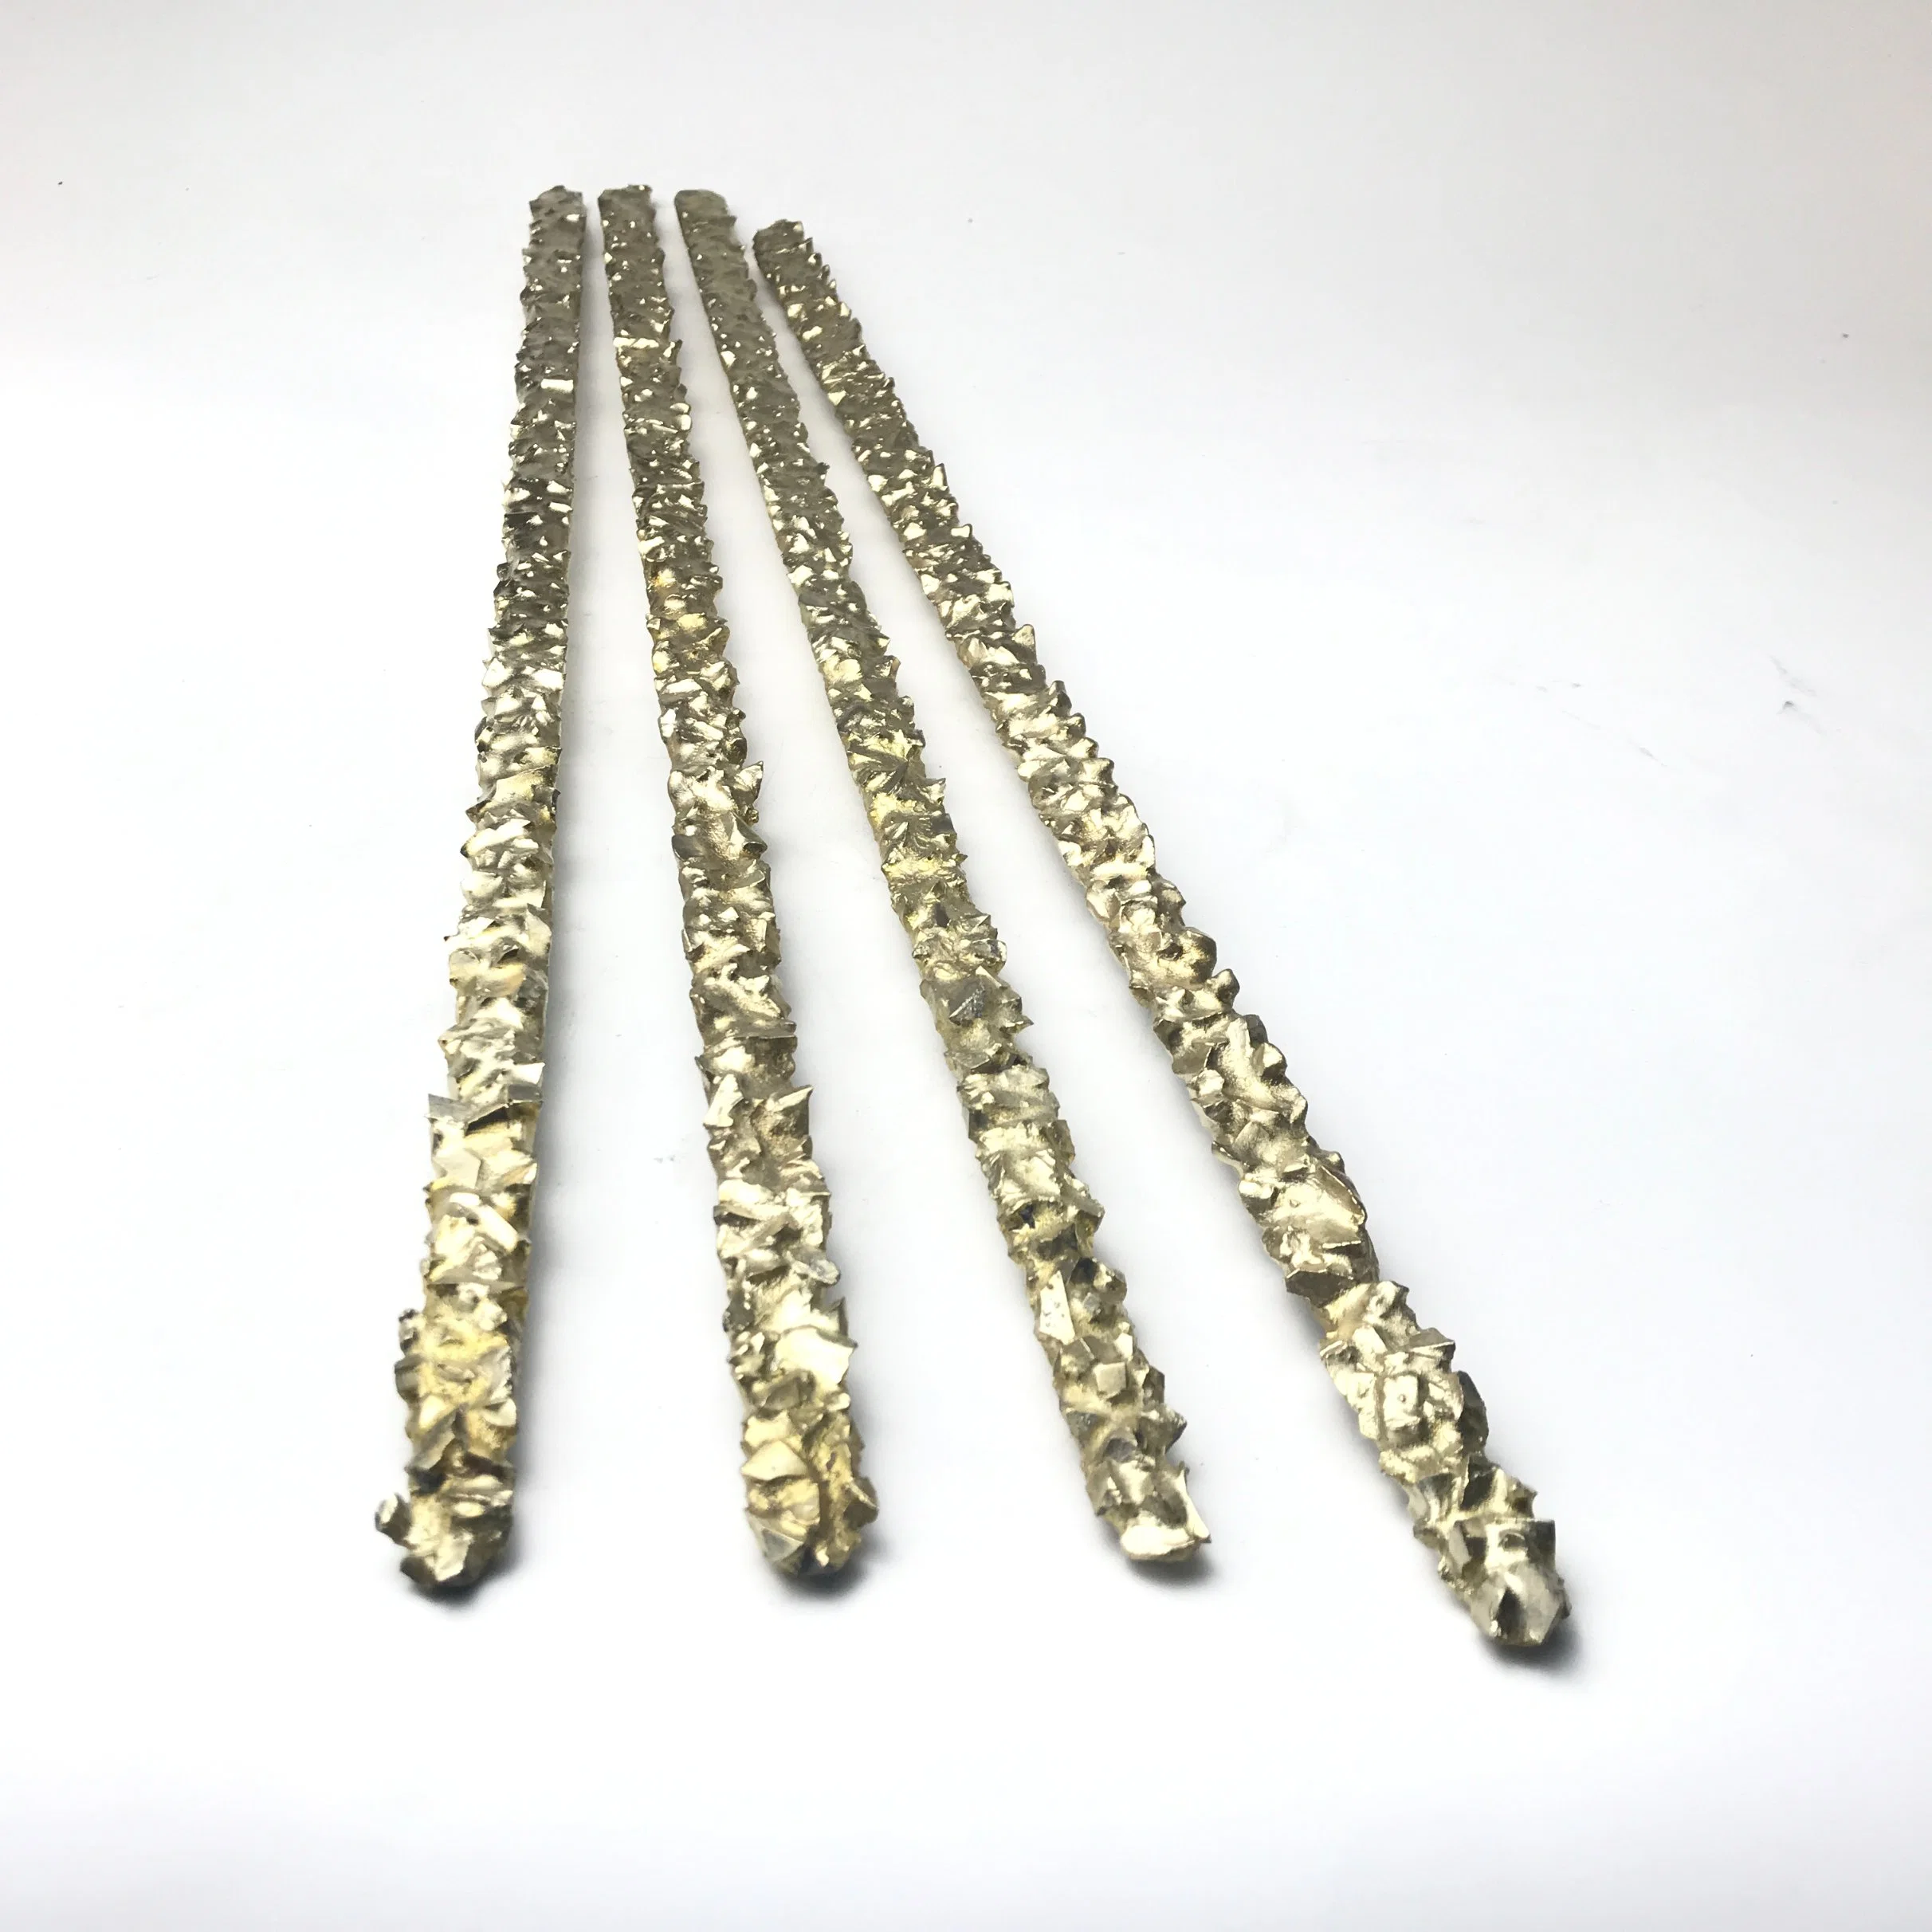 Yd-8 6.4~8.0mm 65/35 Tungsten Carbide Composite Bars with Brazing Flux Coated